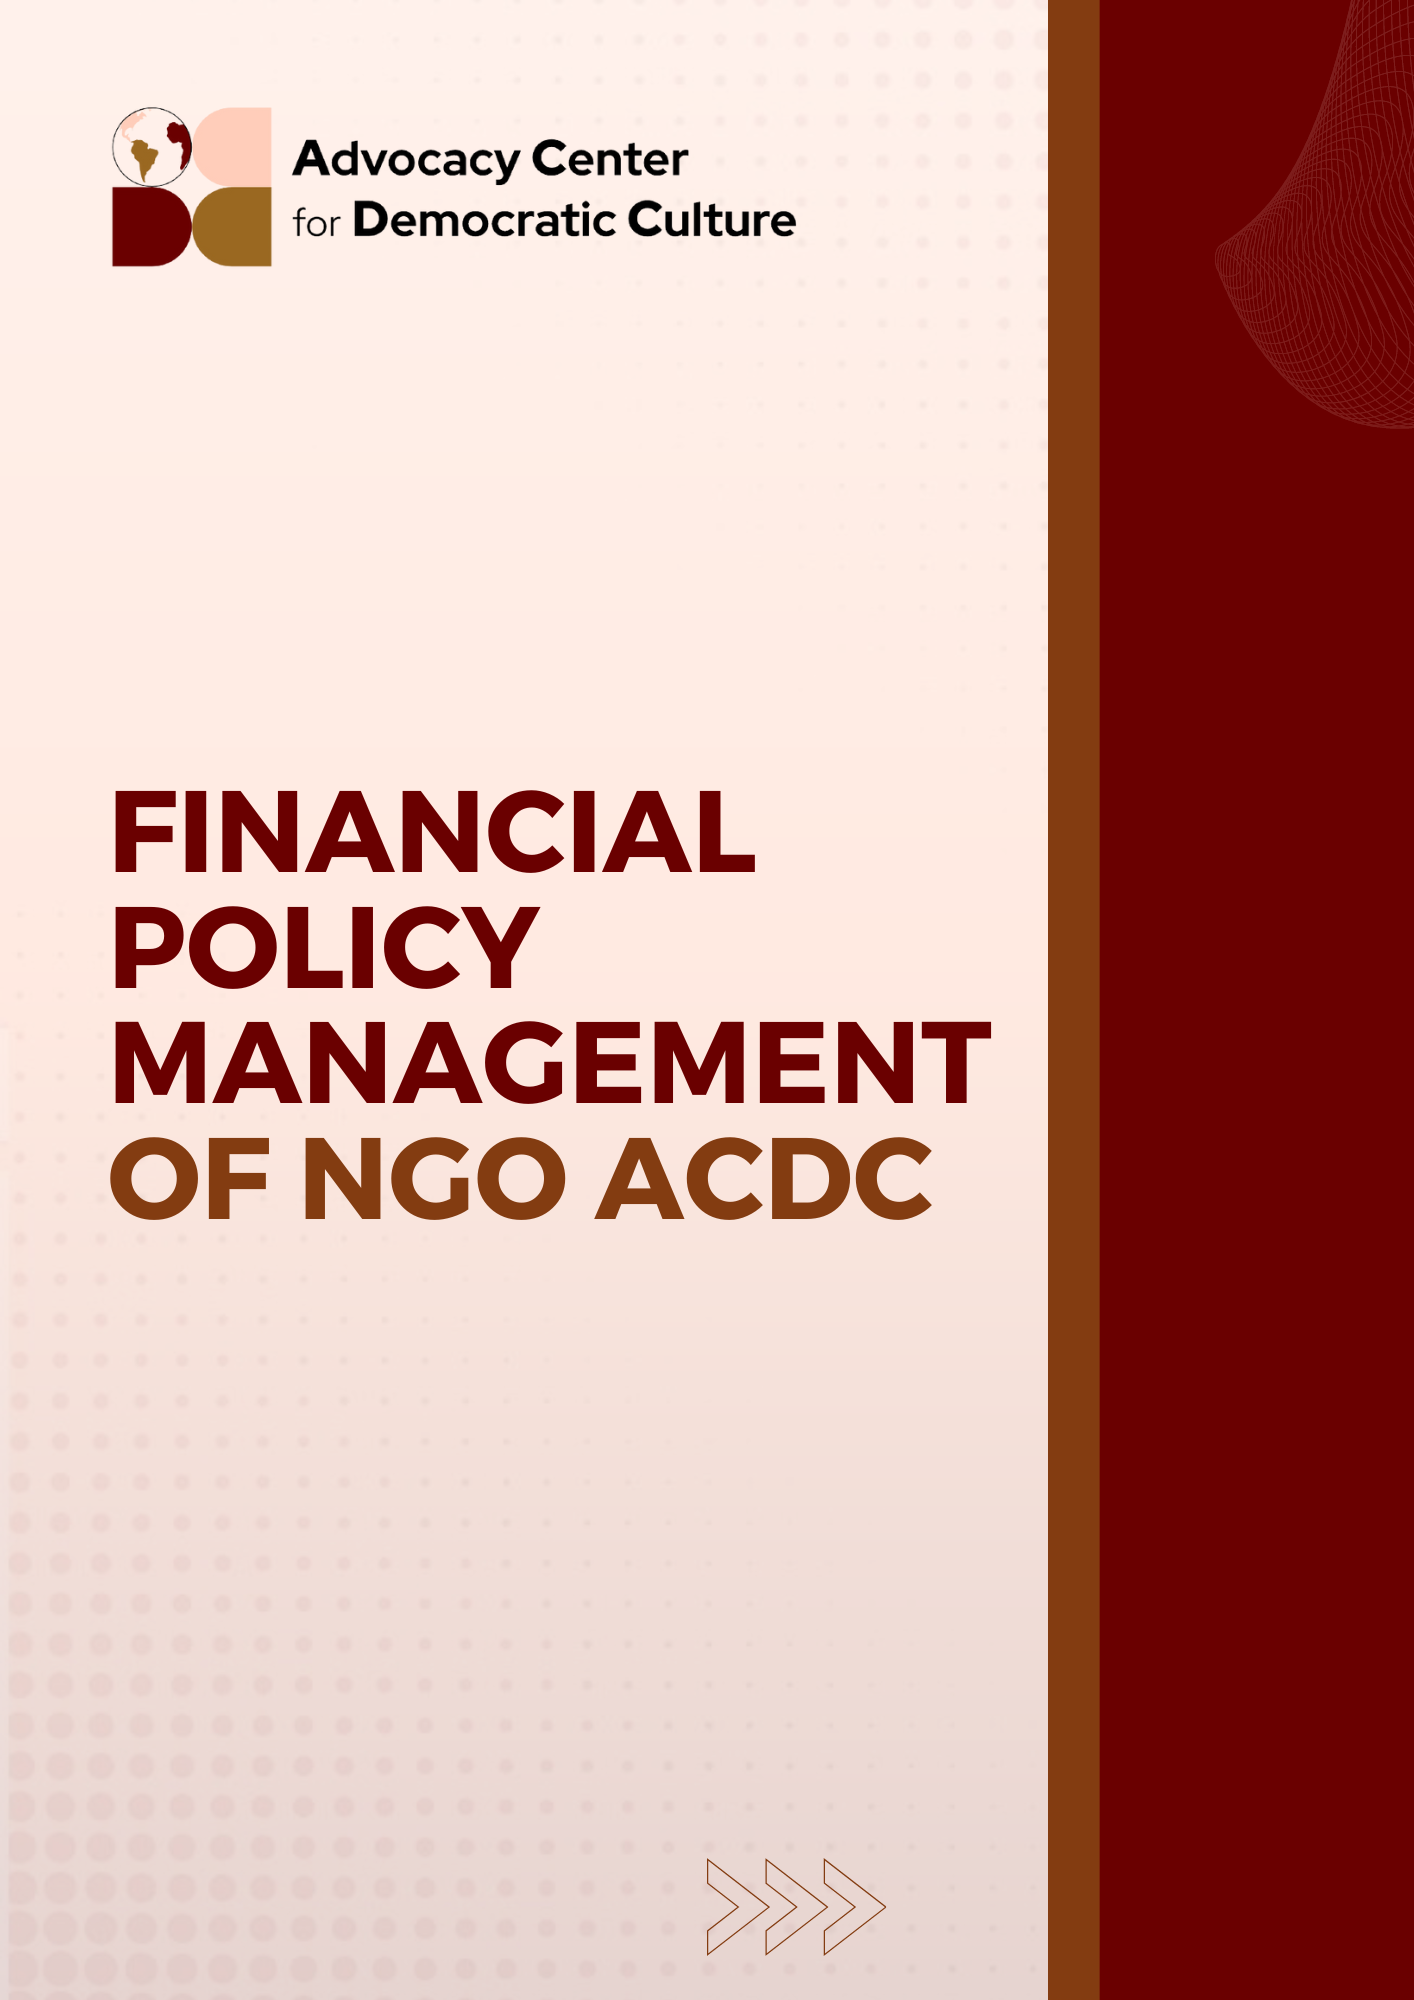 NGO ACDC Financial Policy Management